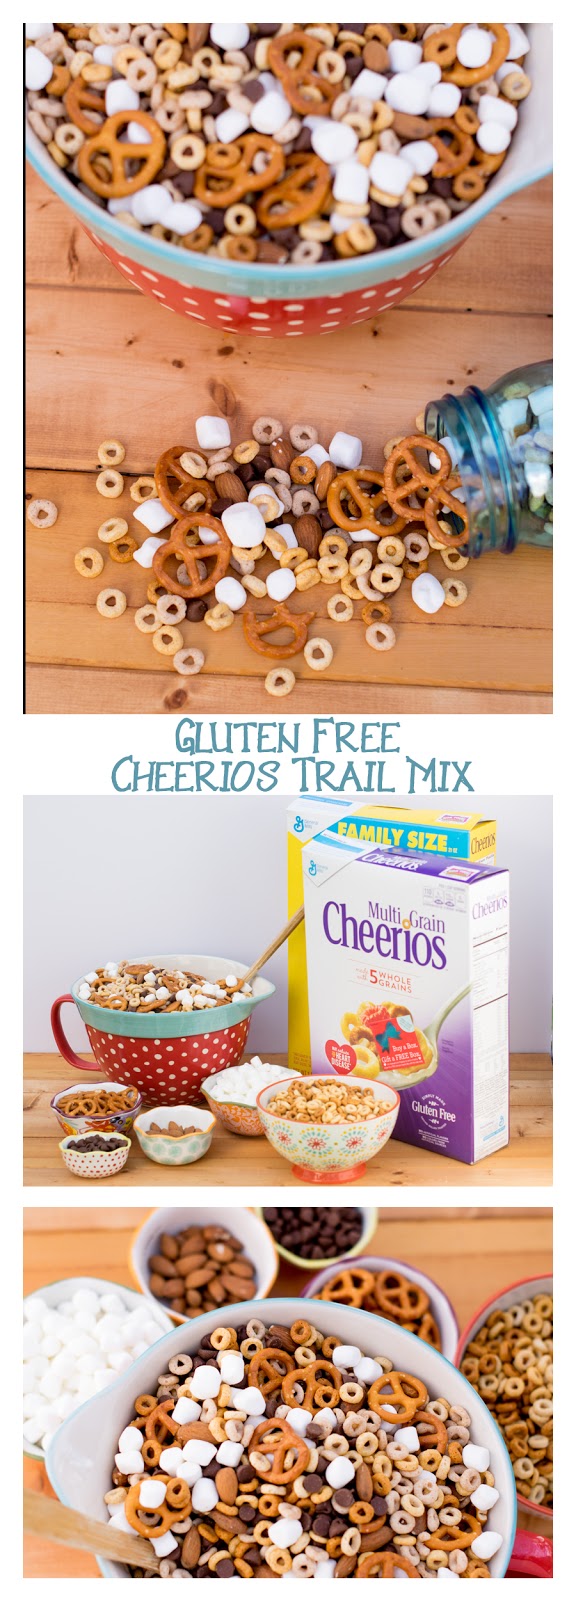 Gluten Free Cheerios Trail Mix is a perfect on the go snack. This easy recipe features gluten free pretzels, marshmallows and nuts. Enjoy your favorite childhood cereal in a whole new way!